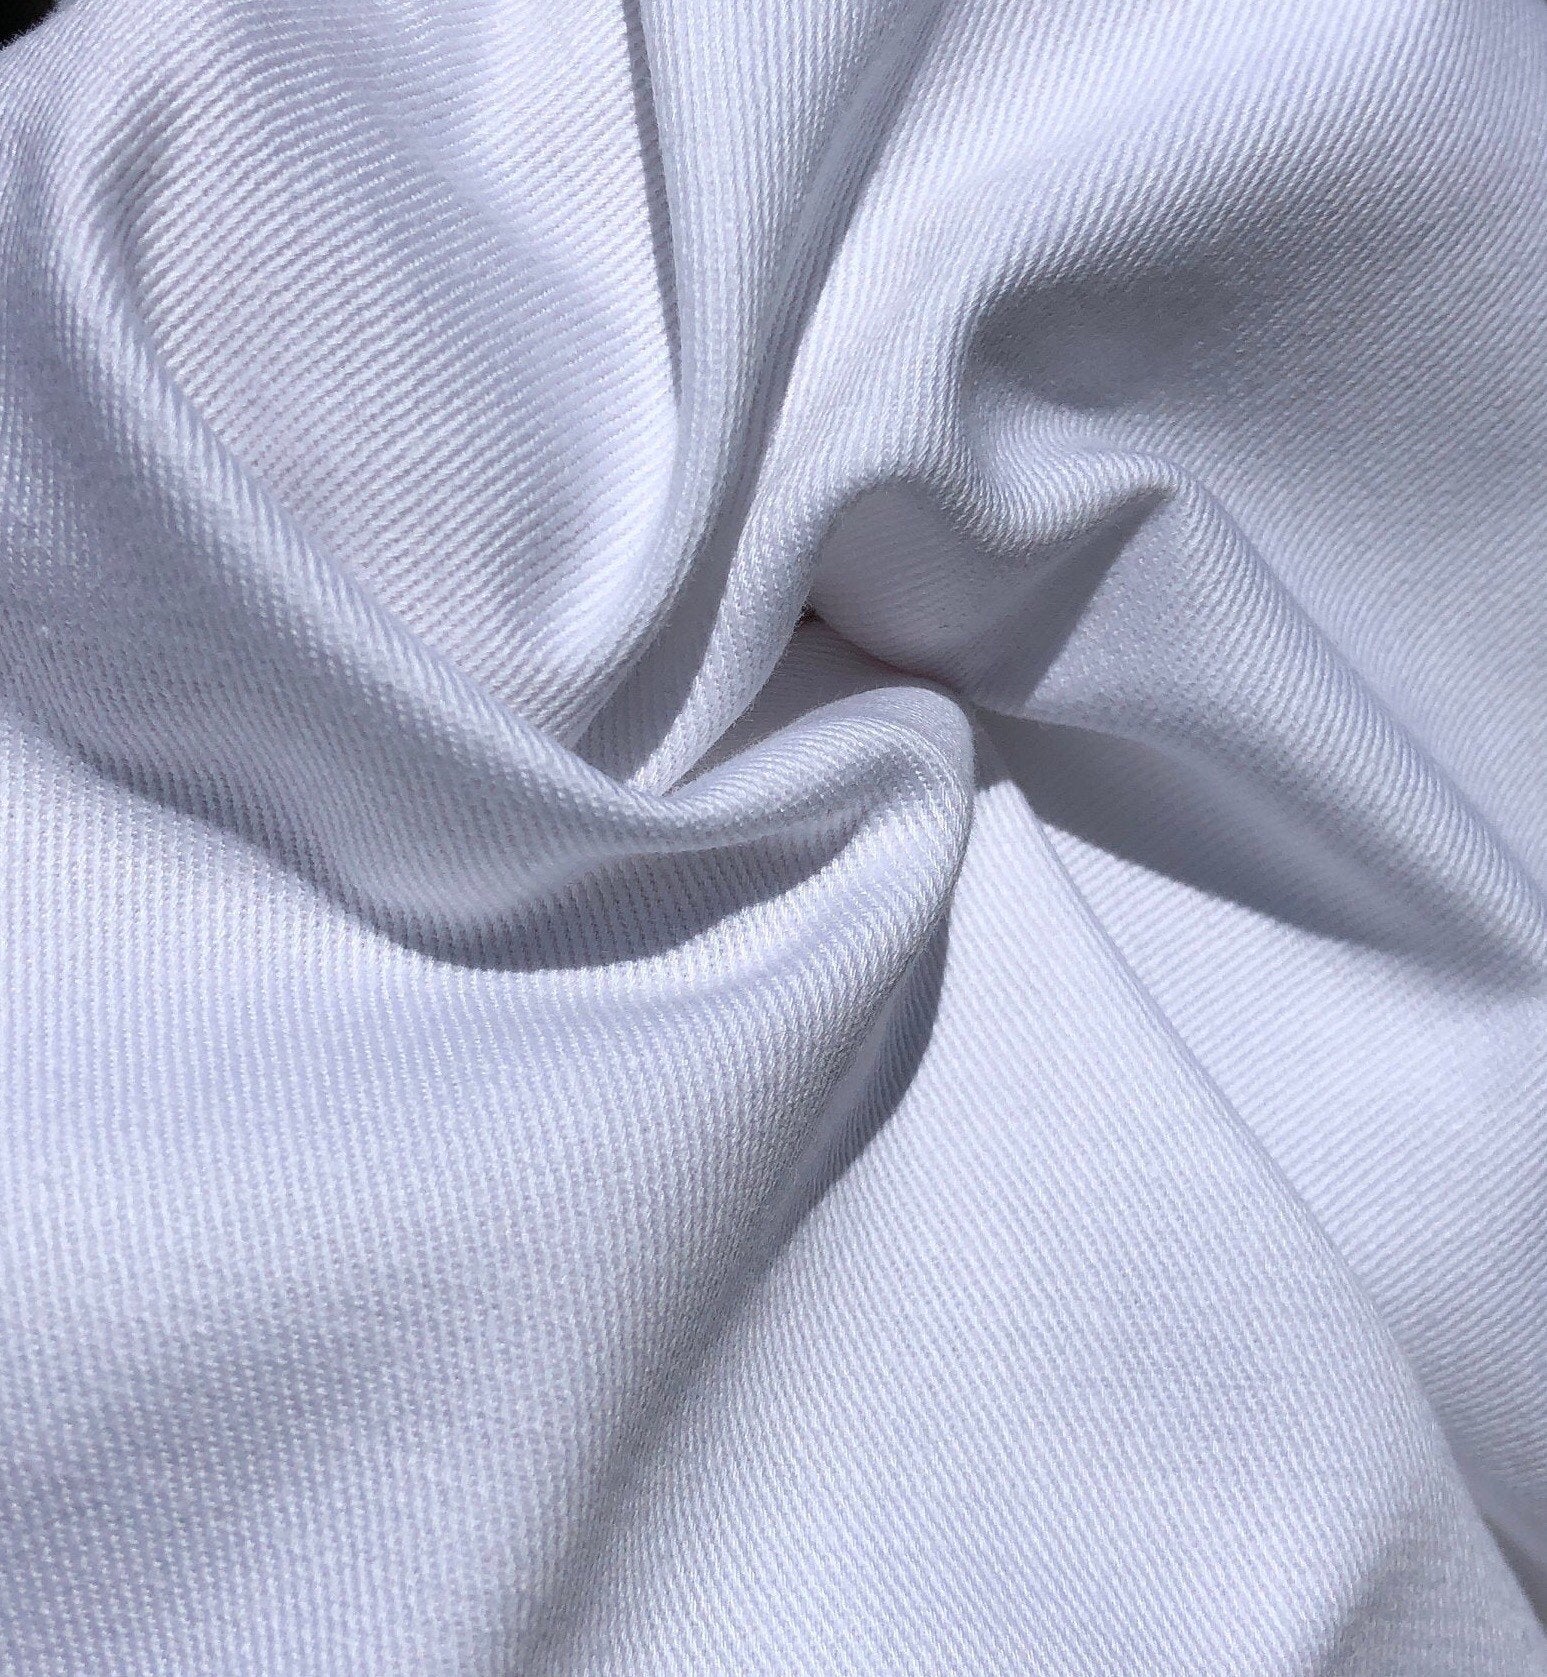 Natural Cotton Fabric Brushed Twill for Upholstery Slipcovers Home Decor 